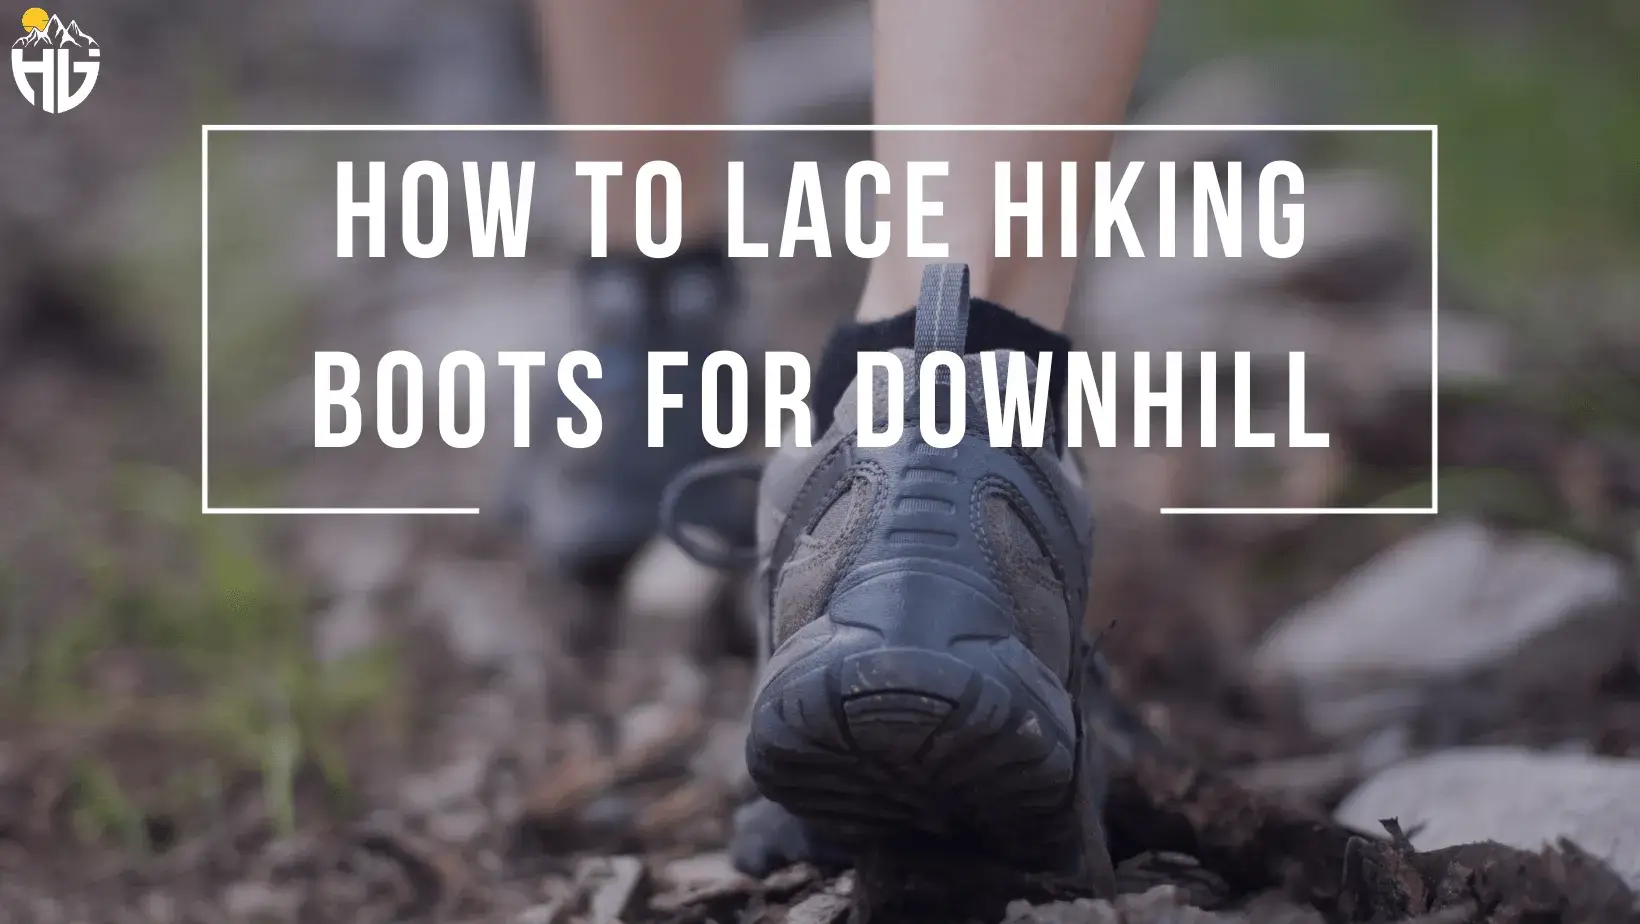 How to lace hiking boots for downhill - Hike Genius